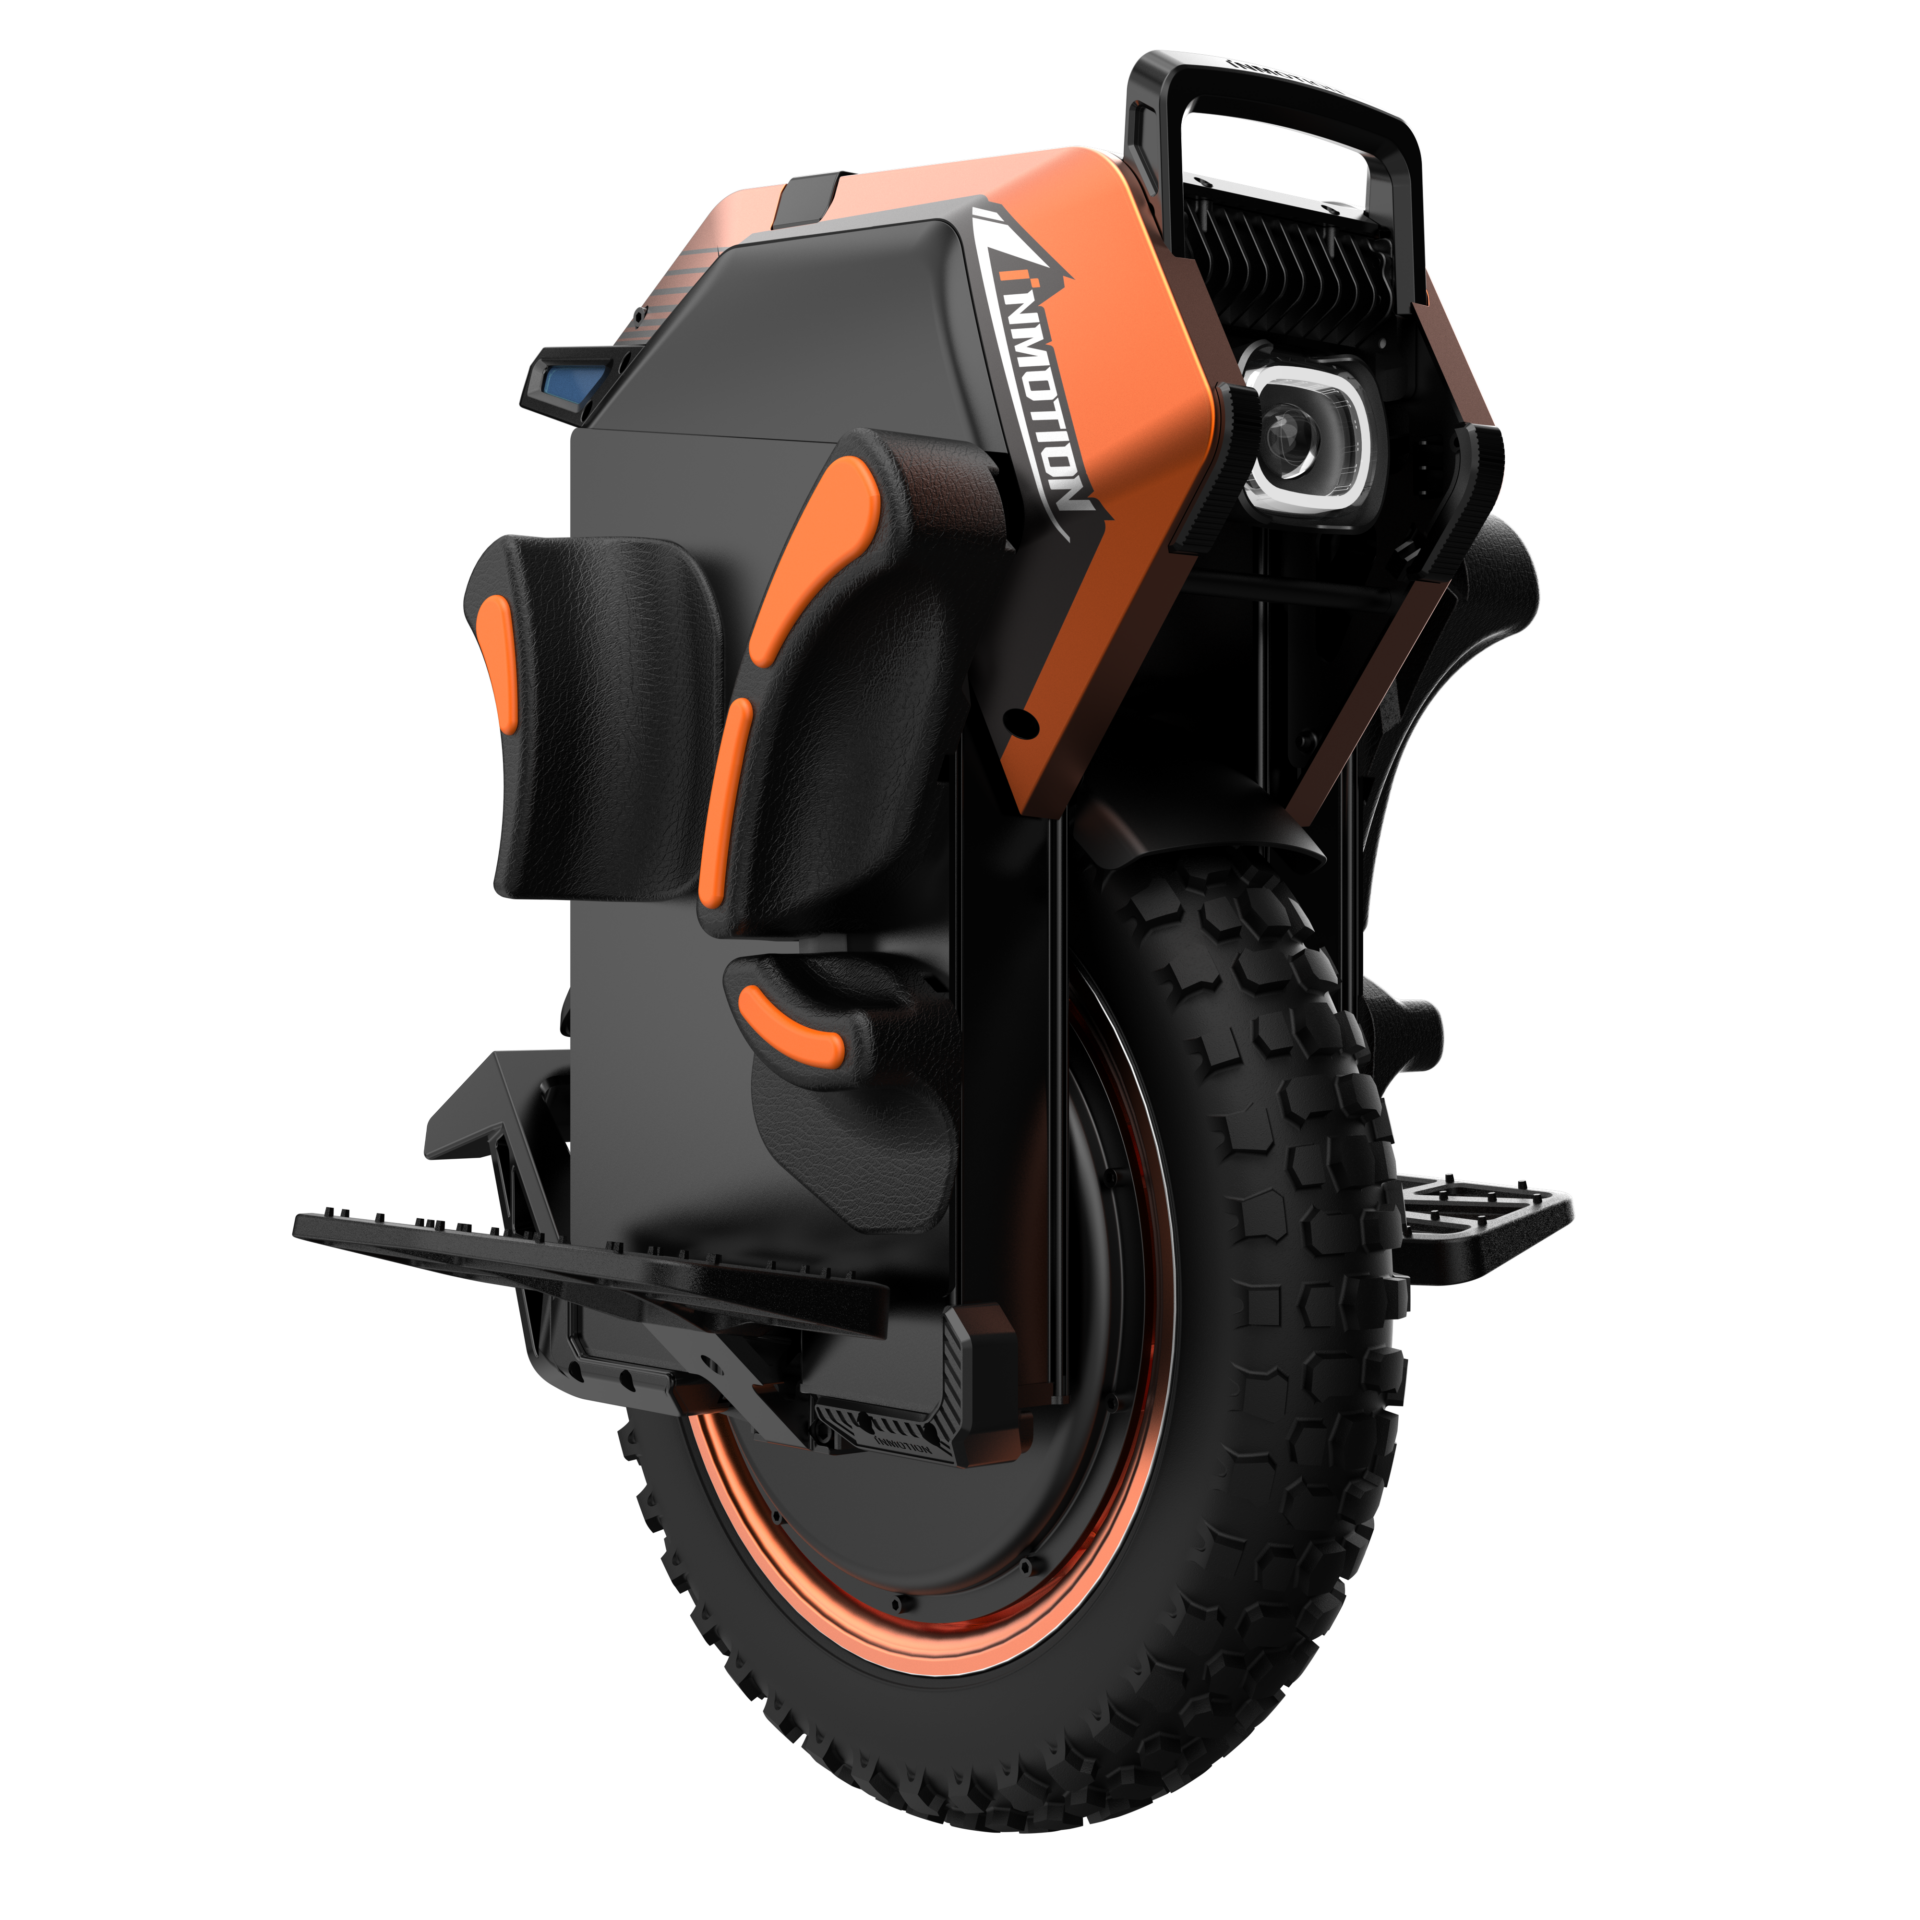 Inmotion V14 50gb electric unicycle